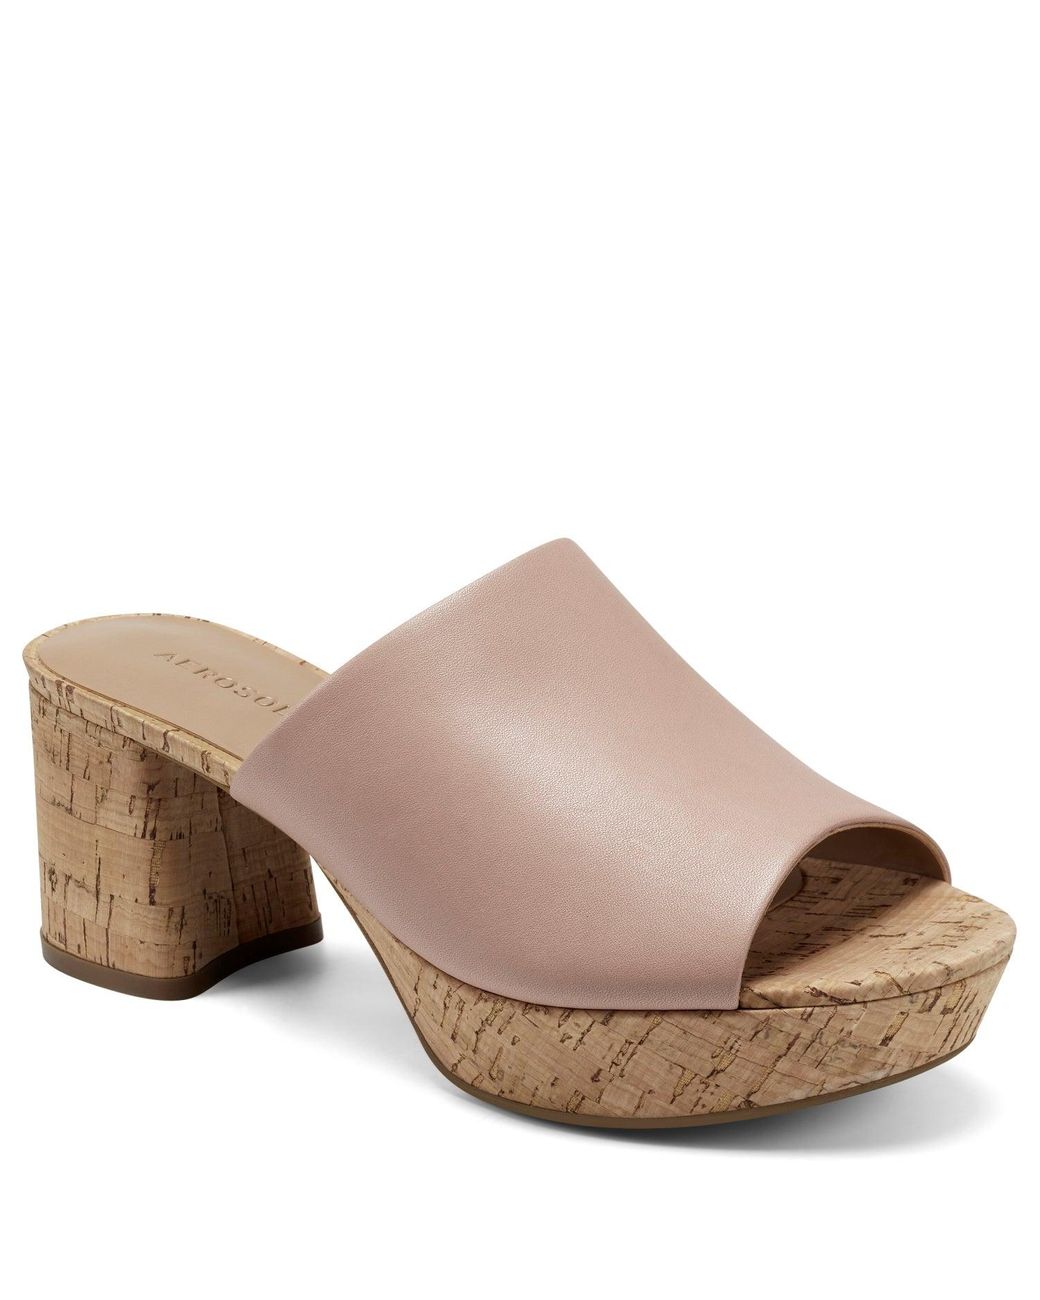 Aerosoles Leather Cassy Sandals in Pink Leather (Brown) - Lyst